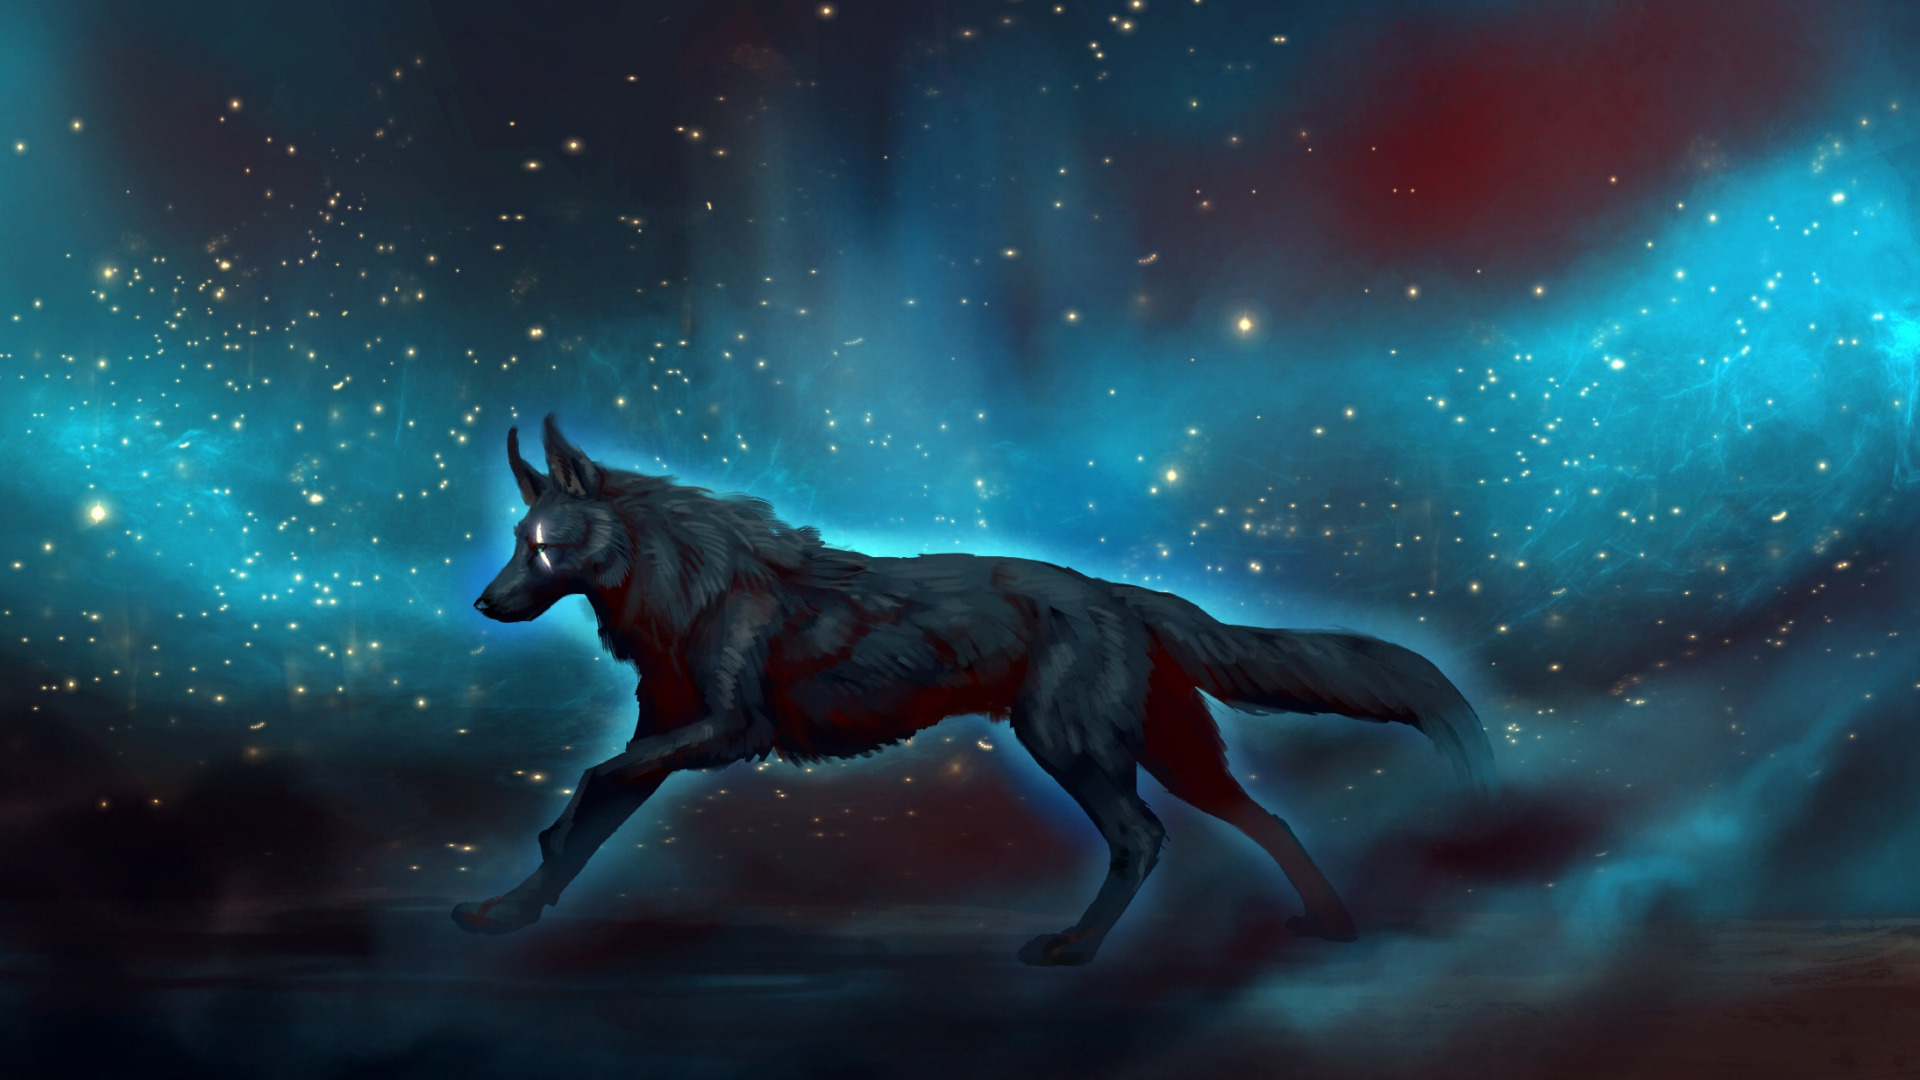 Download wallpaper space, fiction, wolf, by JadeMere, section fantasy in re...